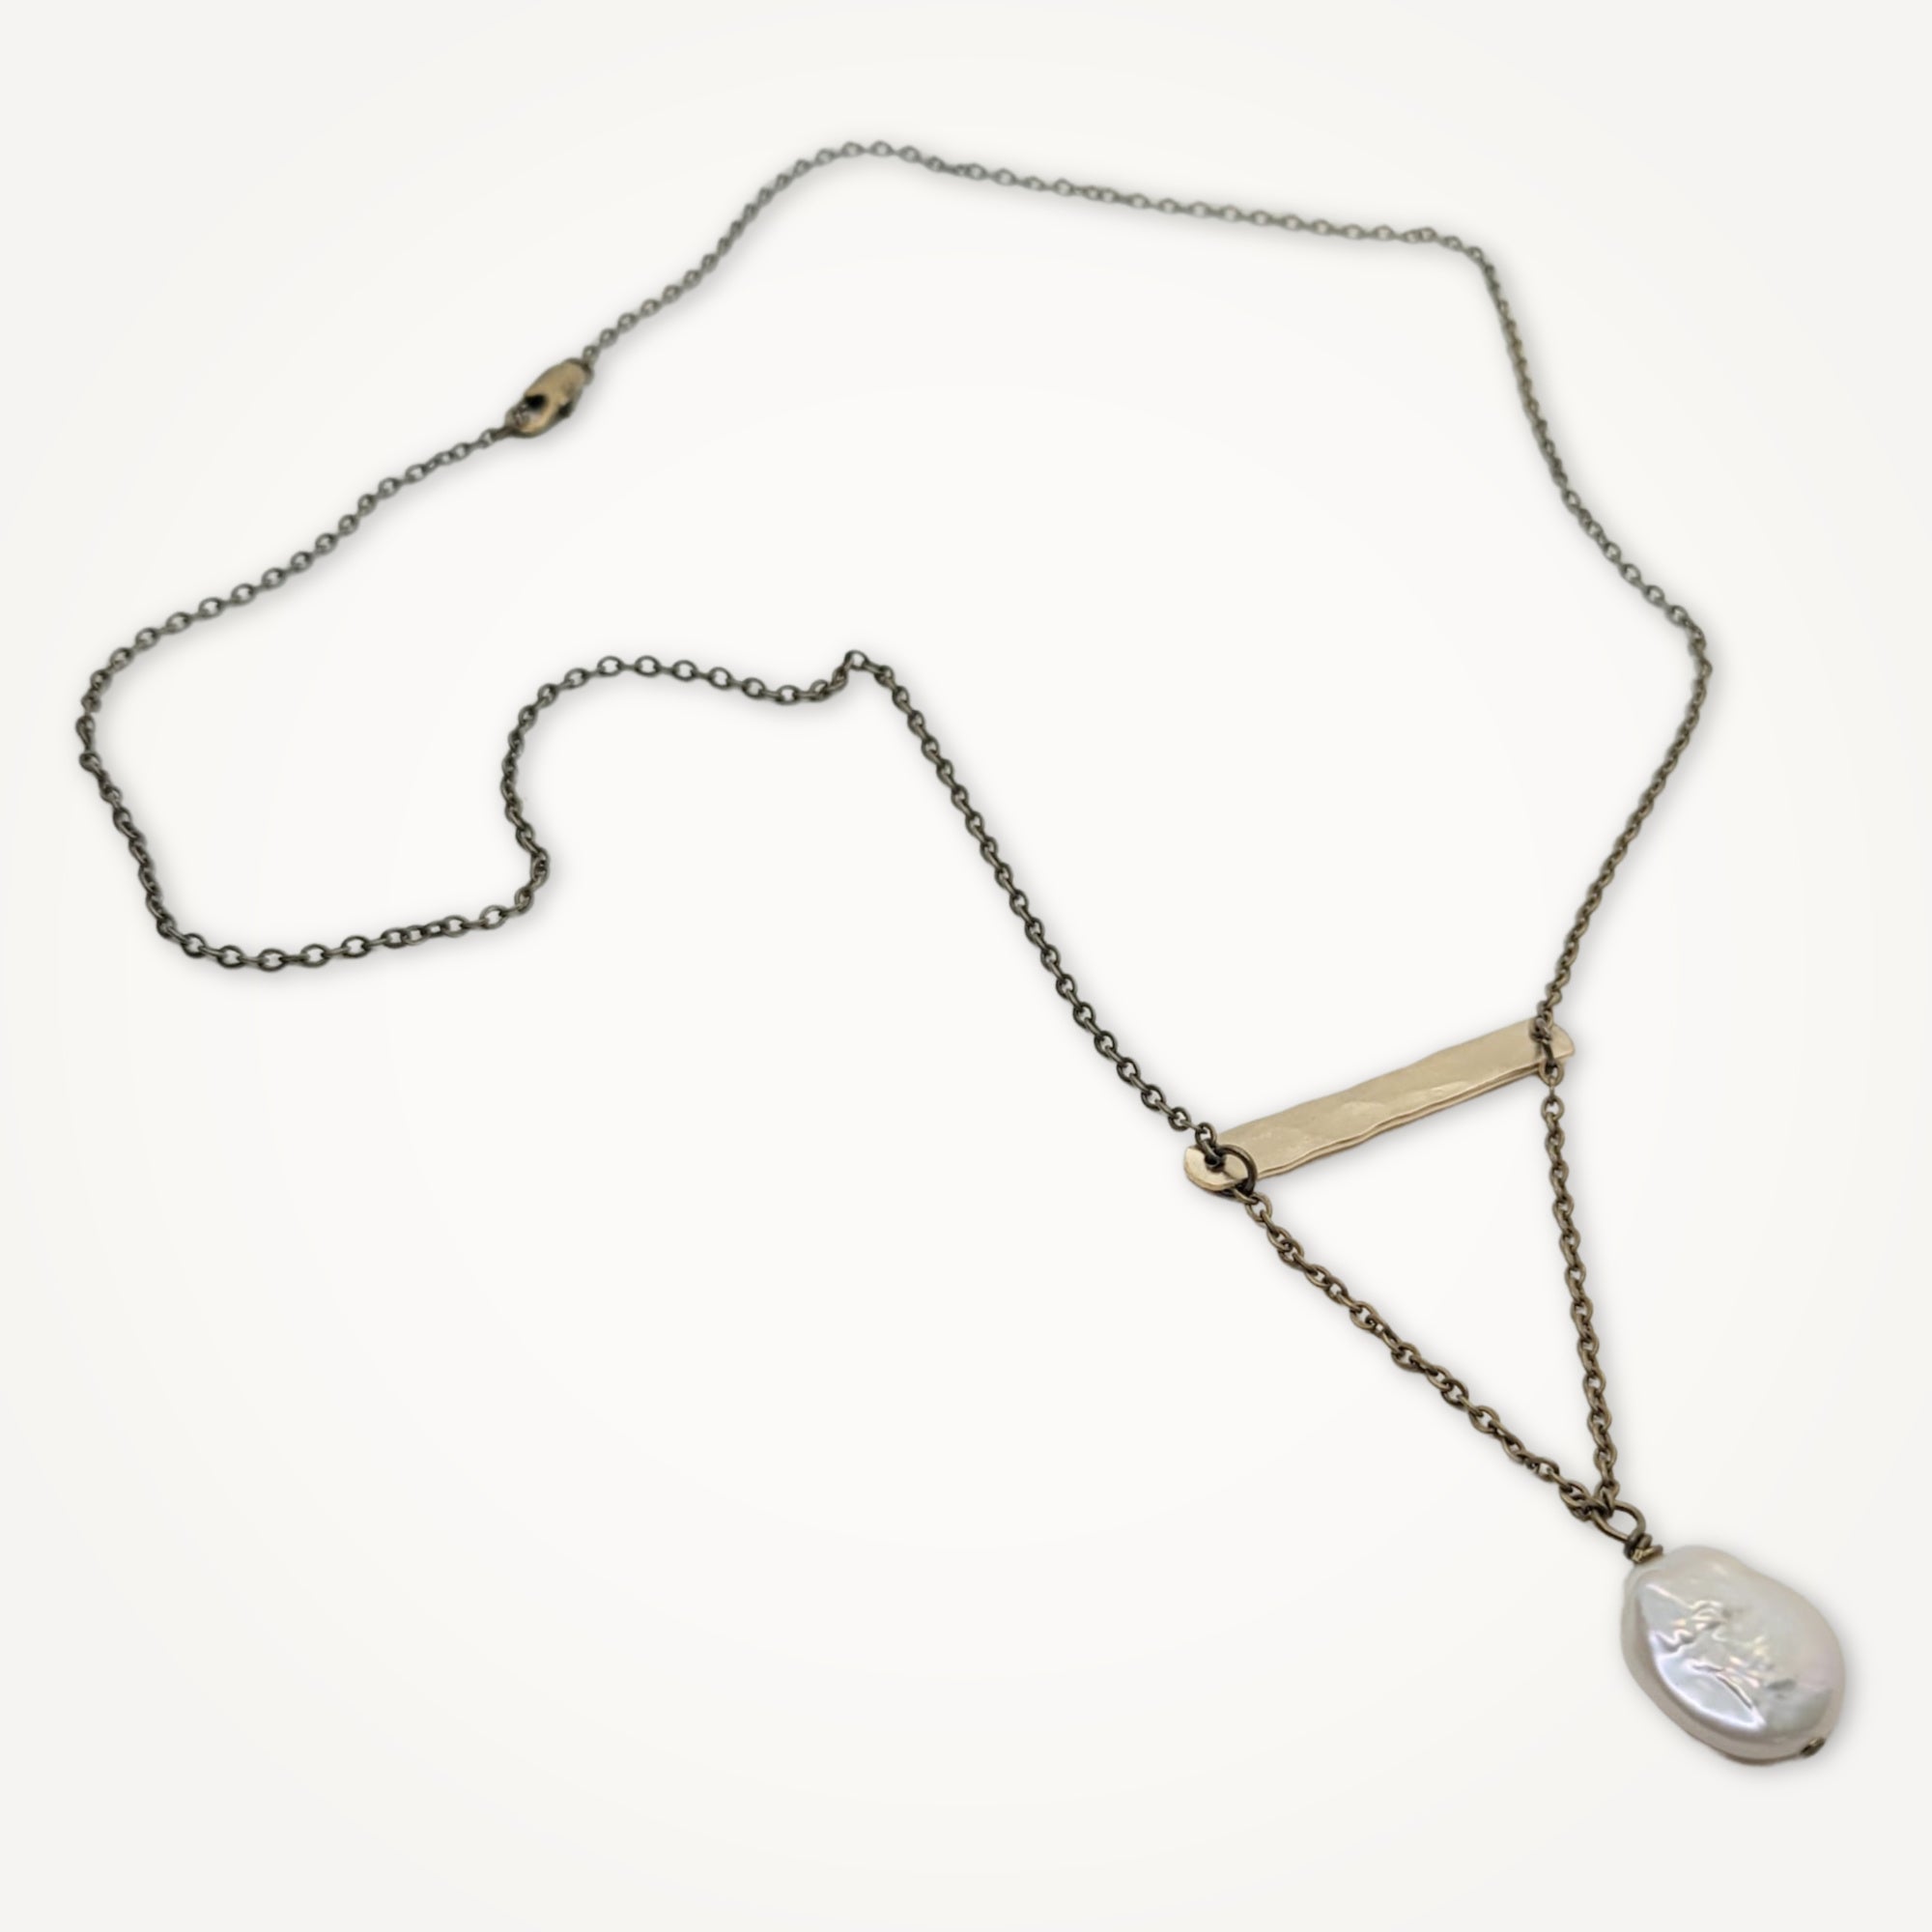 Balance Necklace with Coin Pearl • Antique Brass